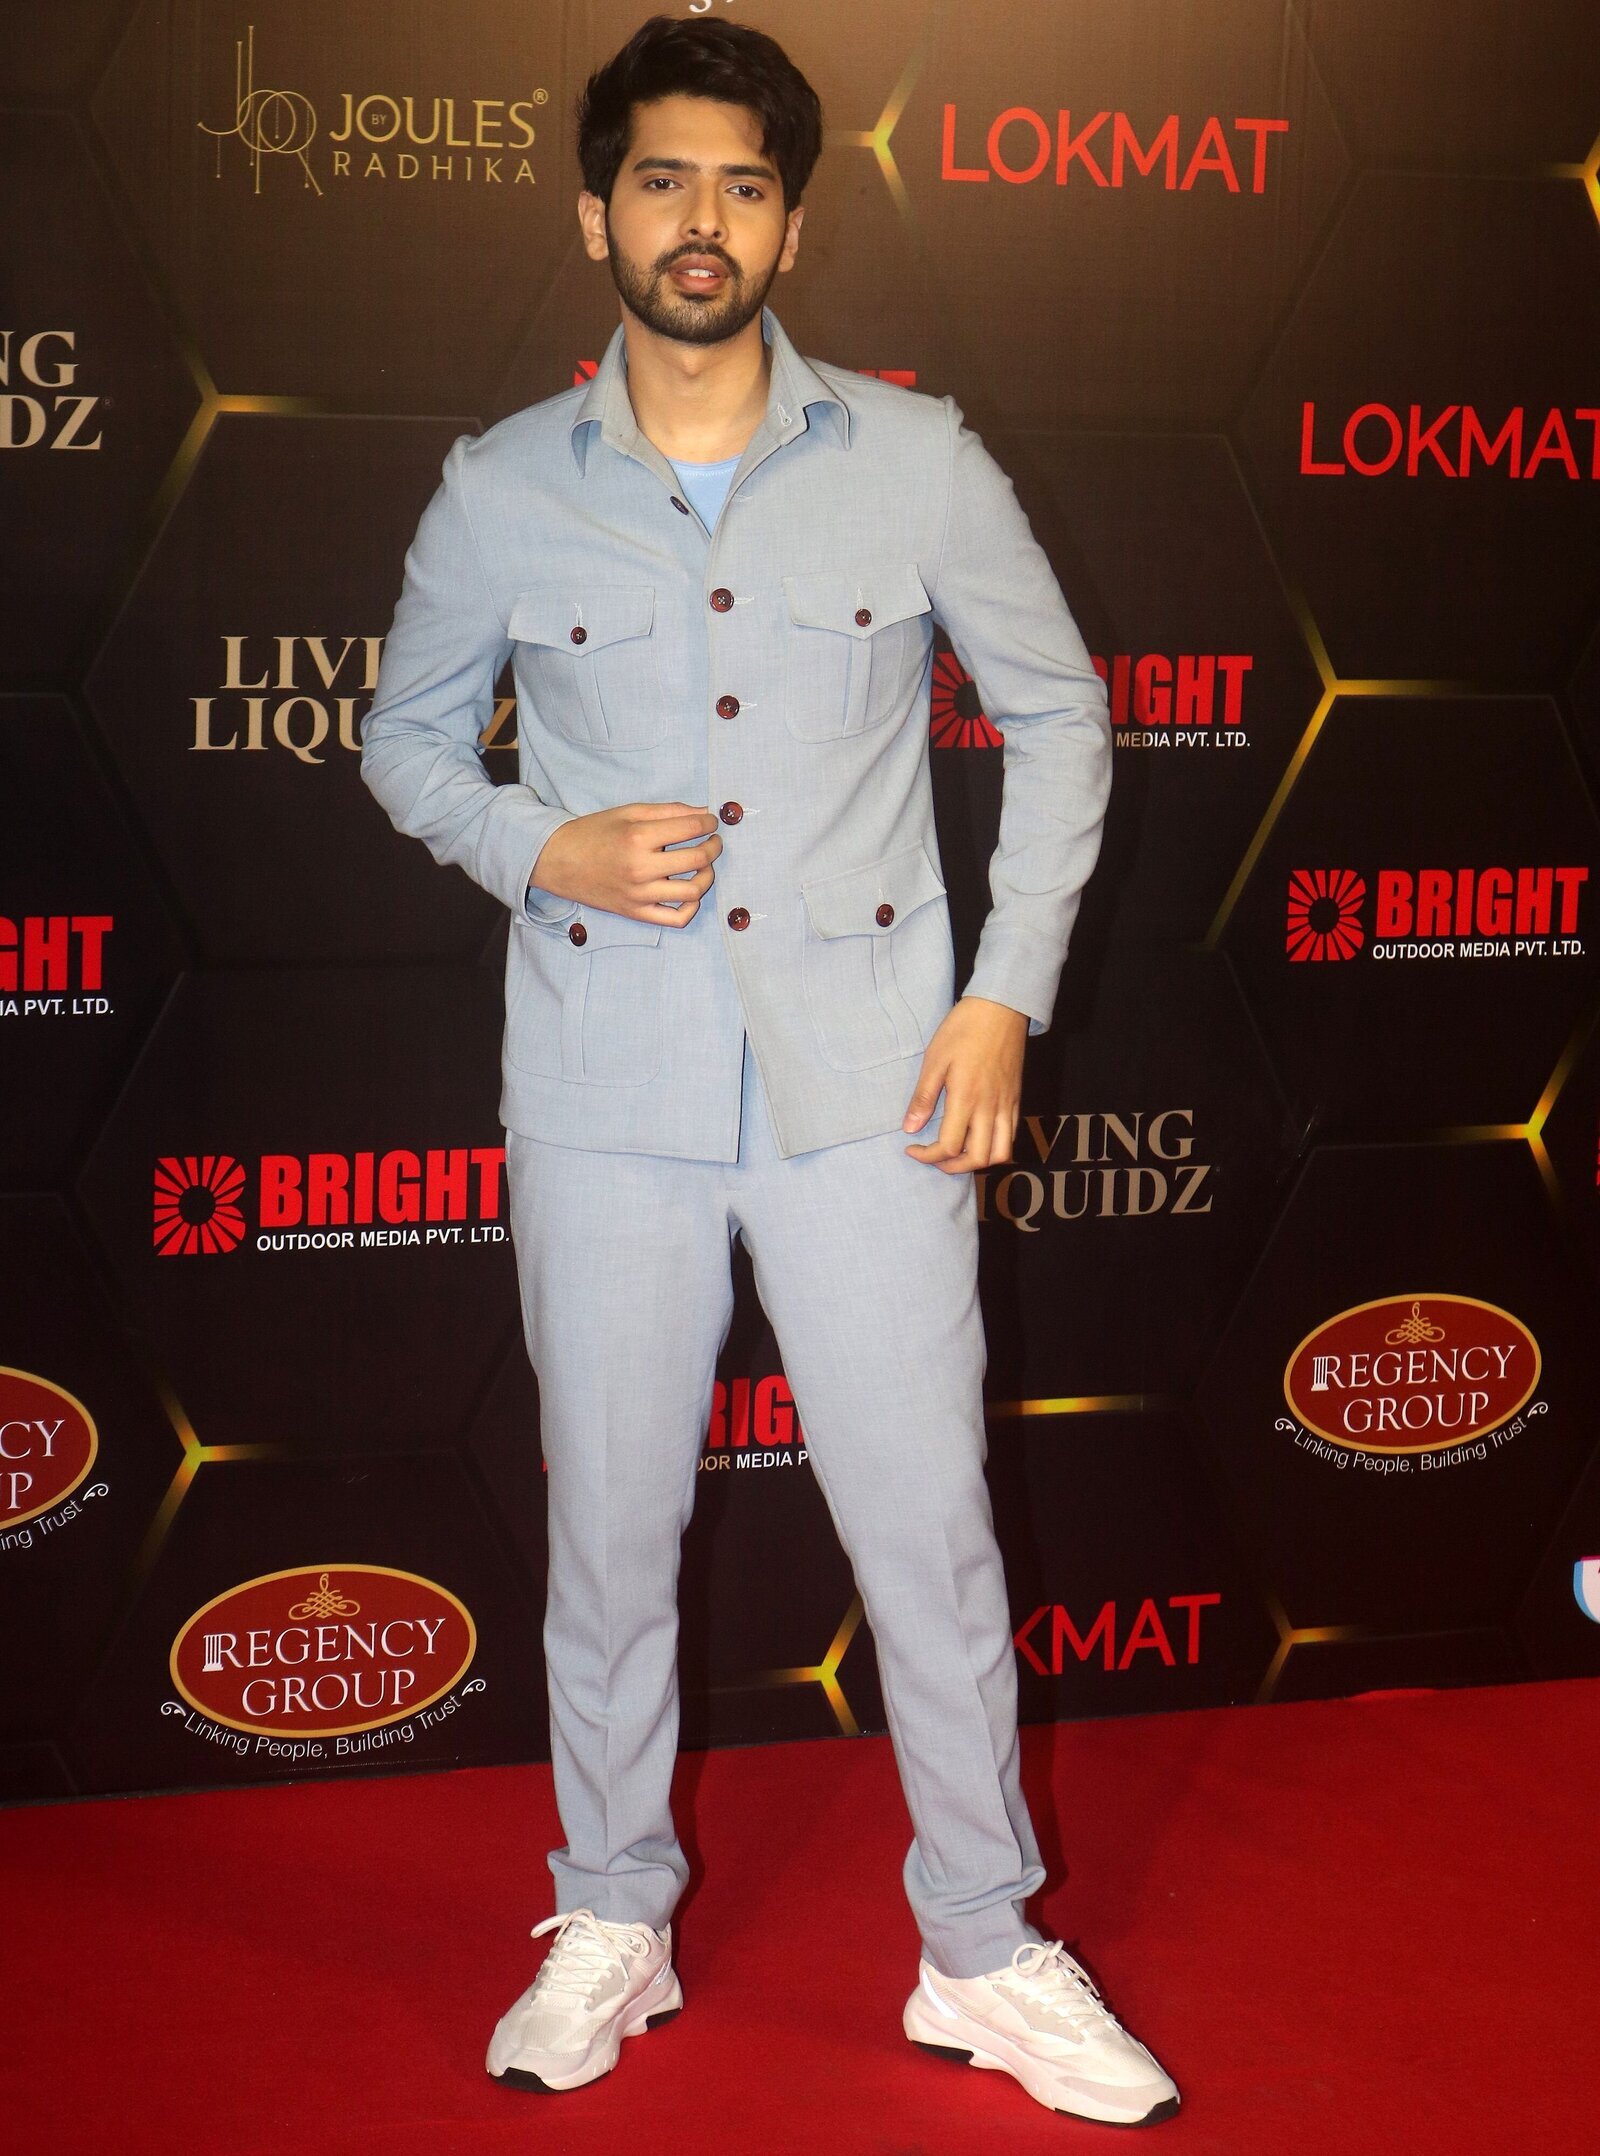 Armaan Malik - Photos: Celebs At The Lokmat Most Stylish Awards 2021 | Picture 1845782